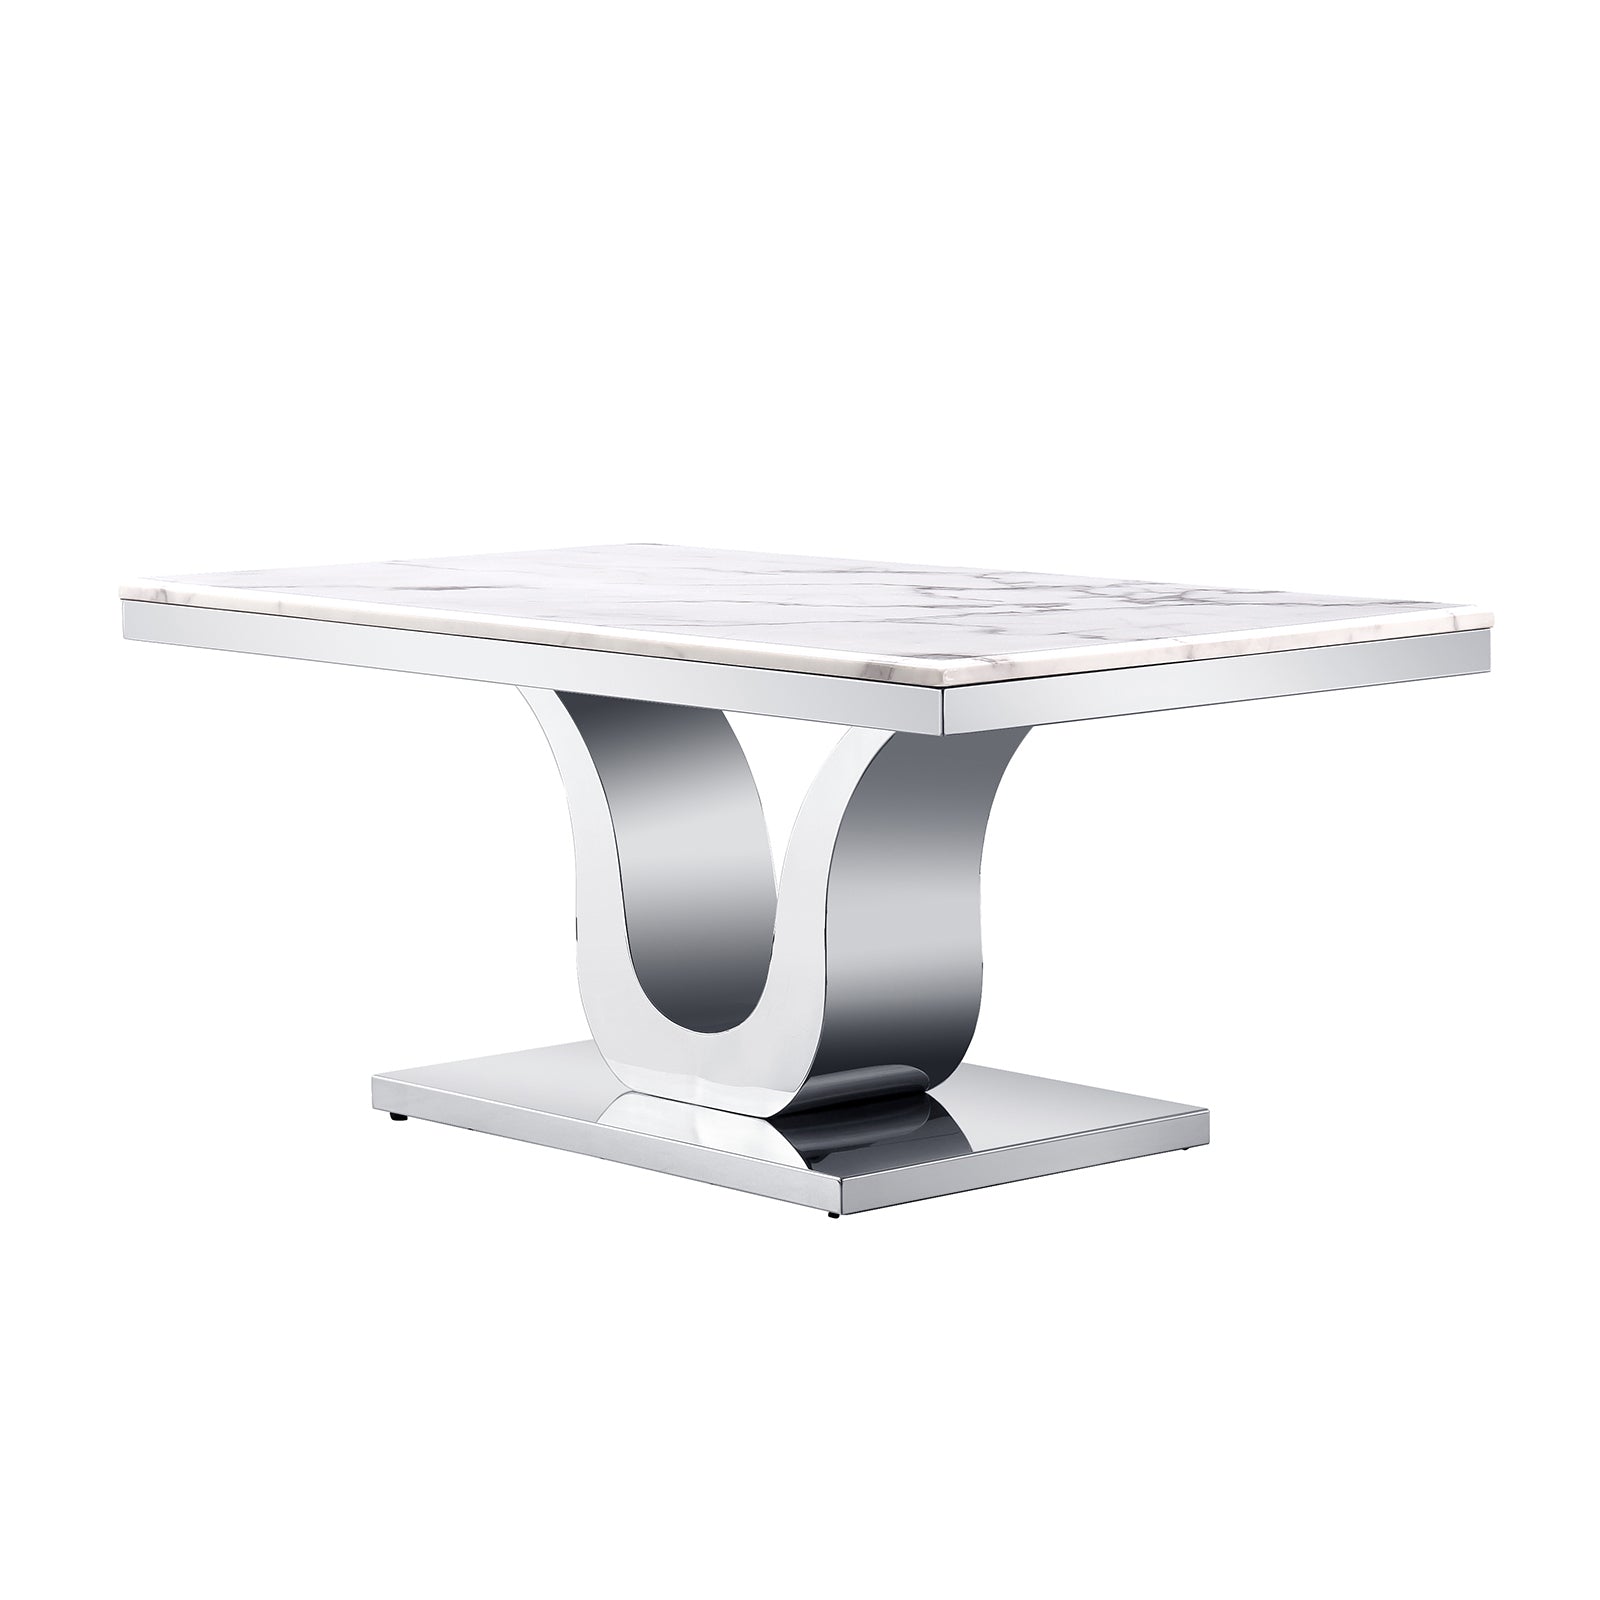 White and Silver Living room table Set | Metal U Base |L211